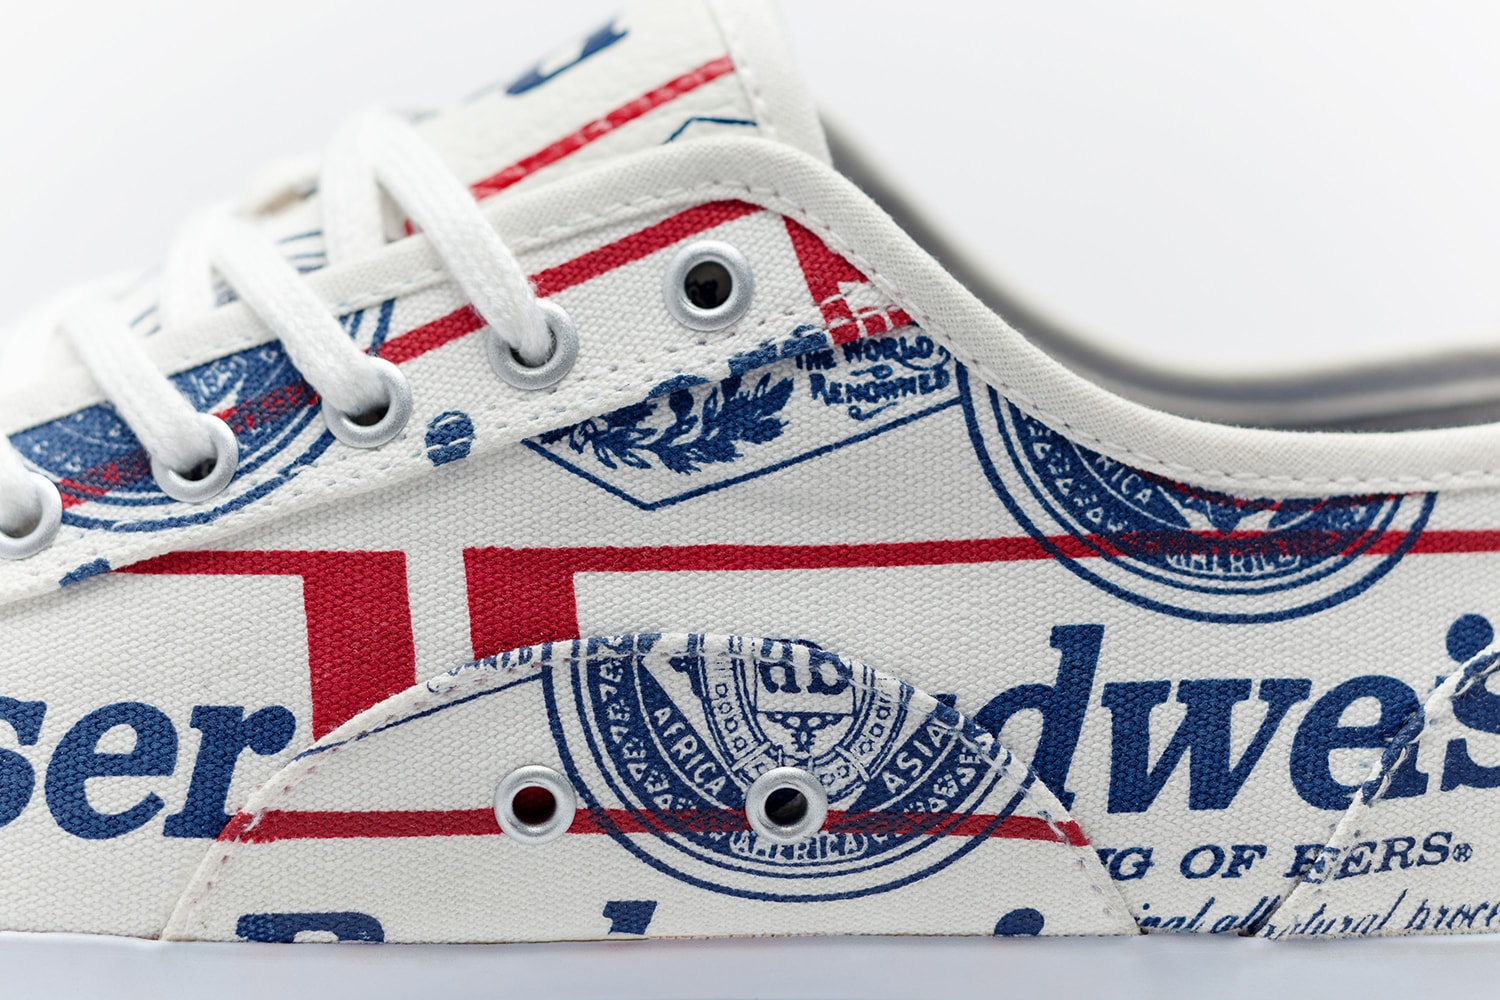 Budweiser x ALIFE x Greats' Wilson Sneaker, beer, canvas, logo, red, blue, america, classic